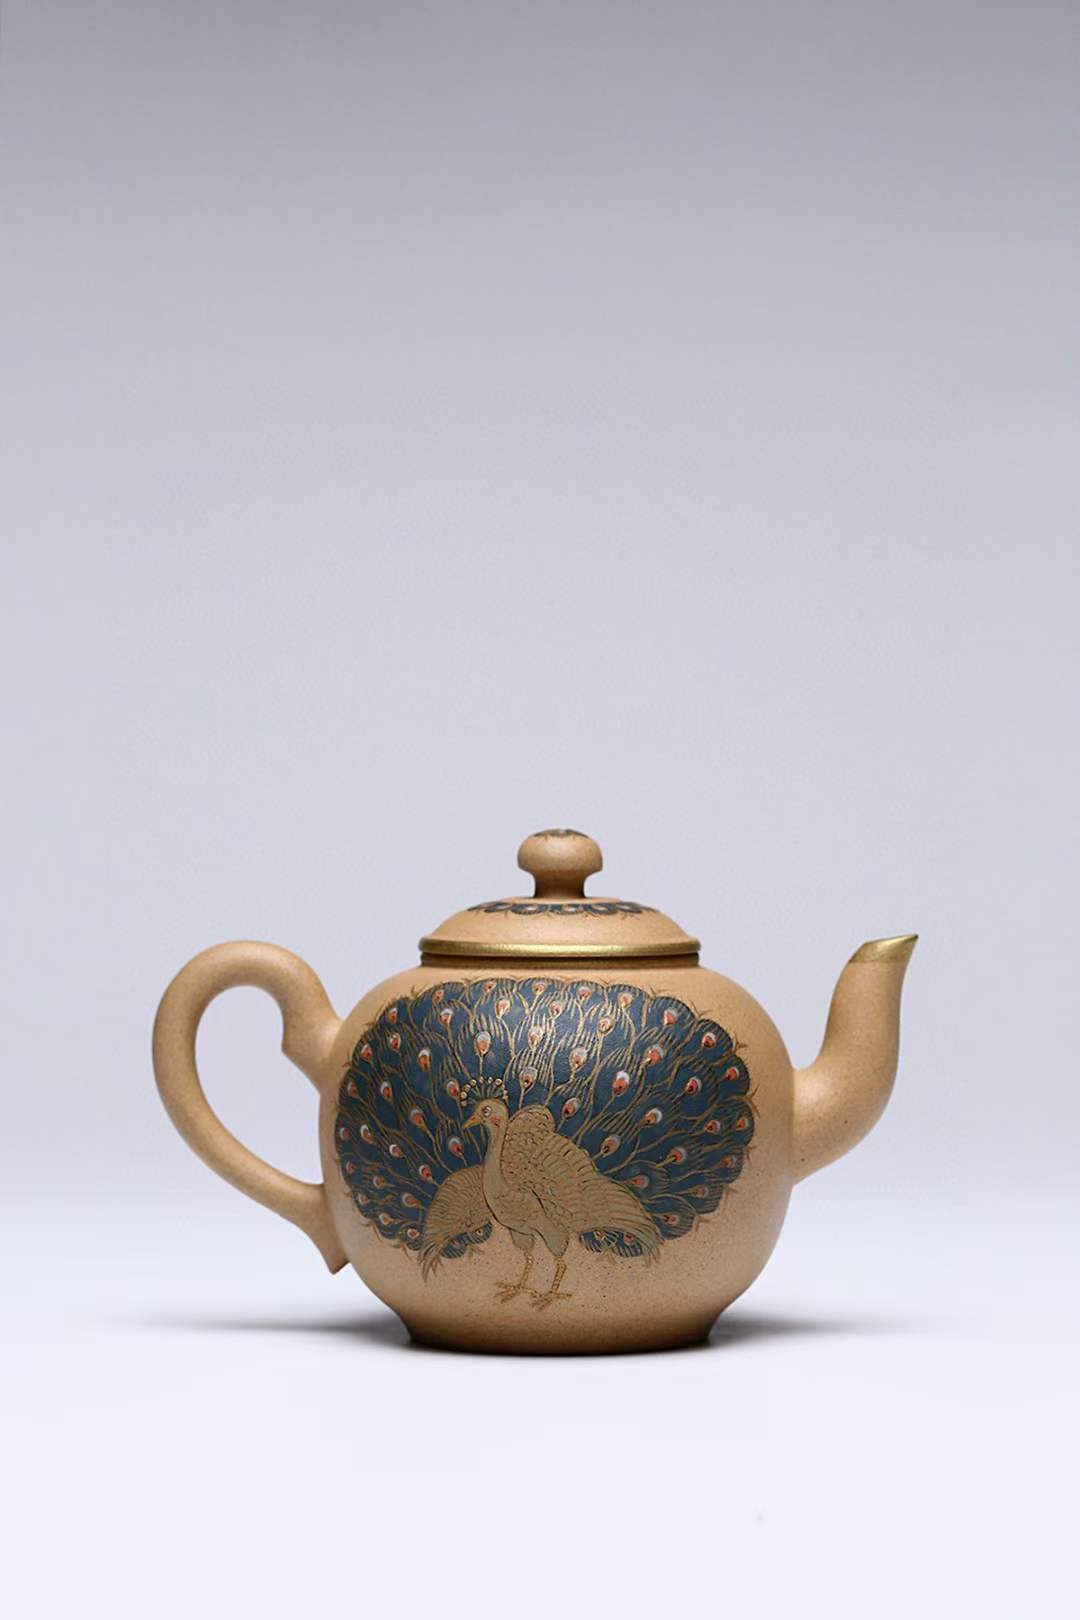 [Collection grade] Mud Peacock Kaiping Zisha Teapot in the Original Mine Section